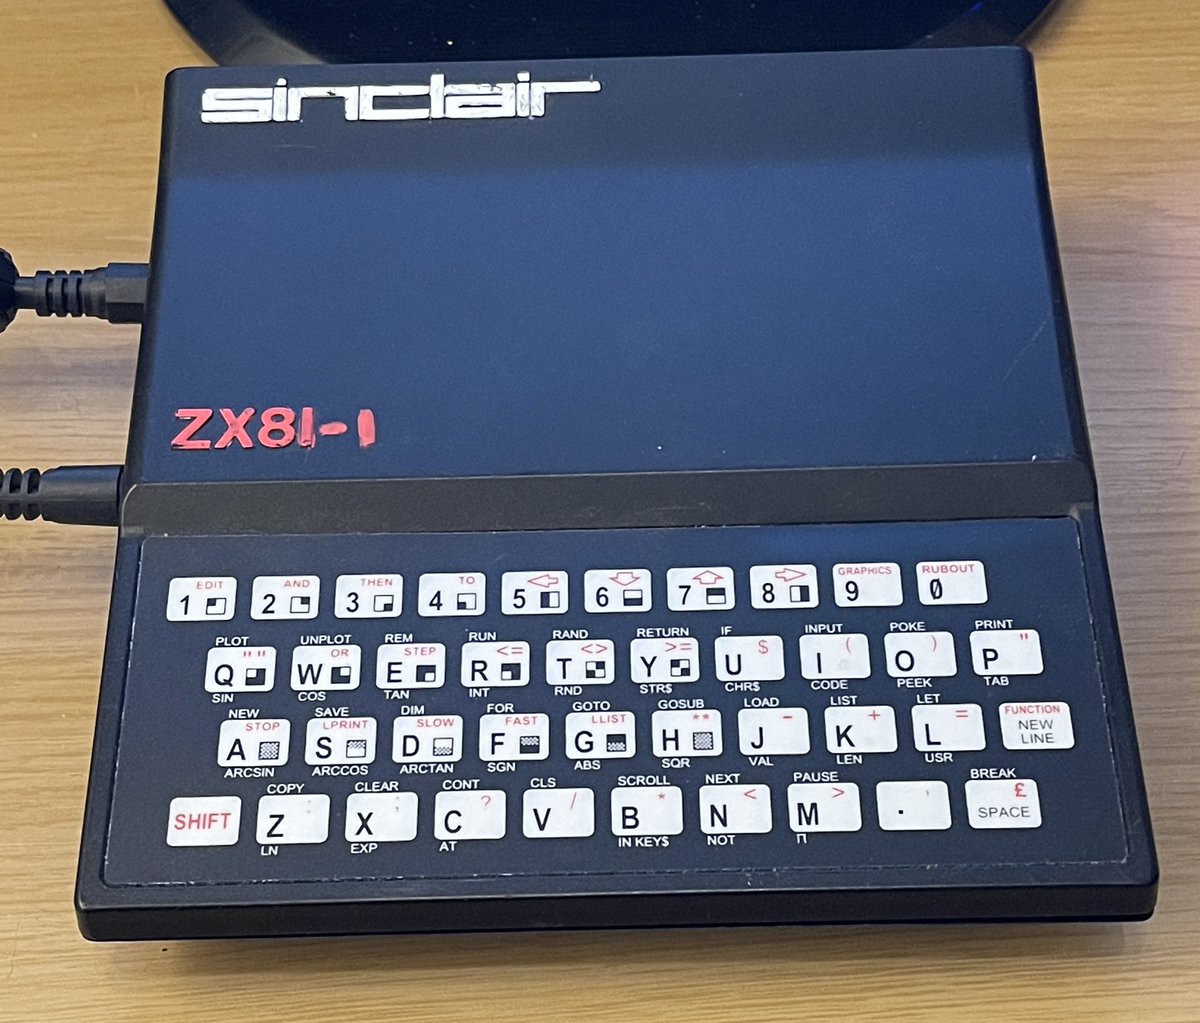 My Sinclair ZX80 clone. Not had it out for some time. #RetroComputing